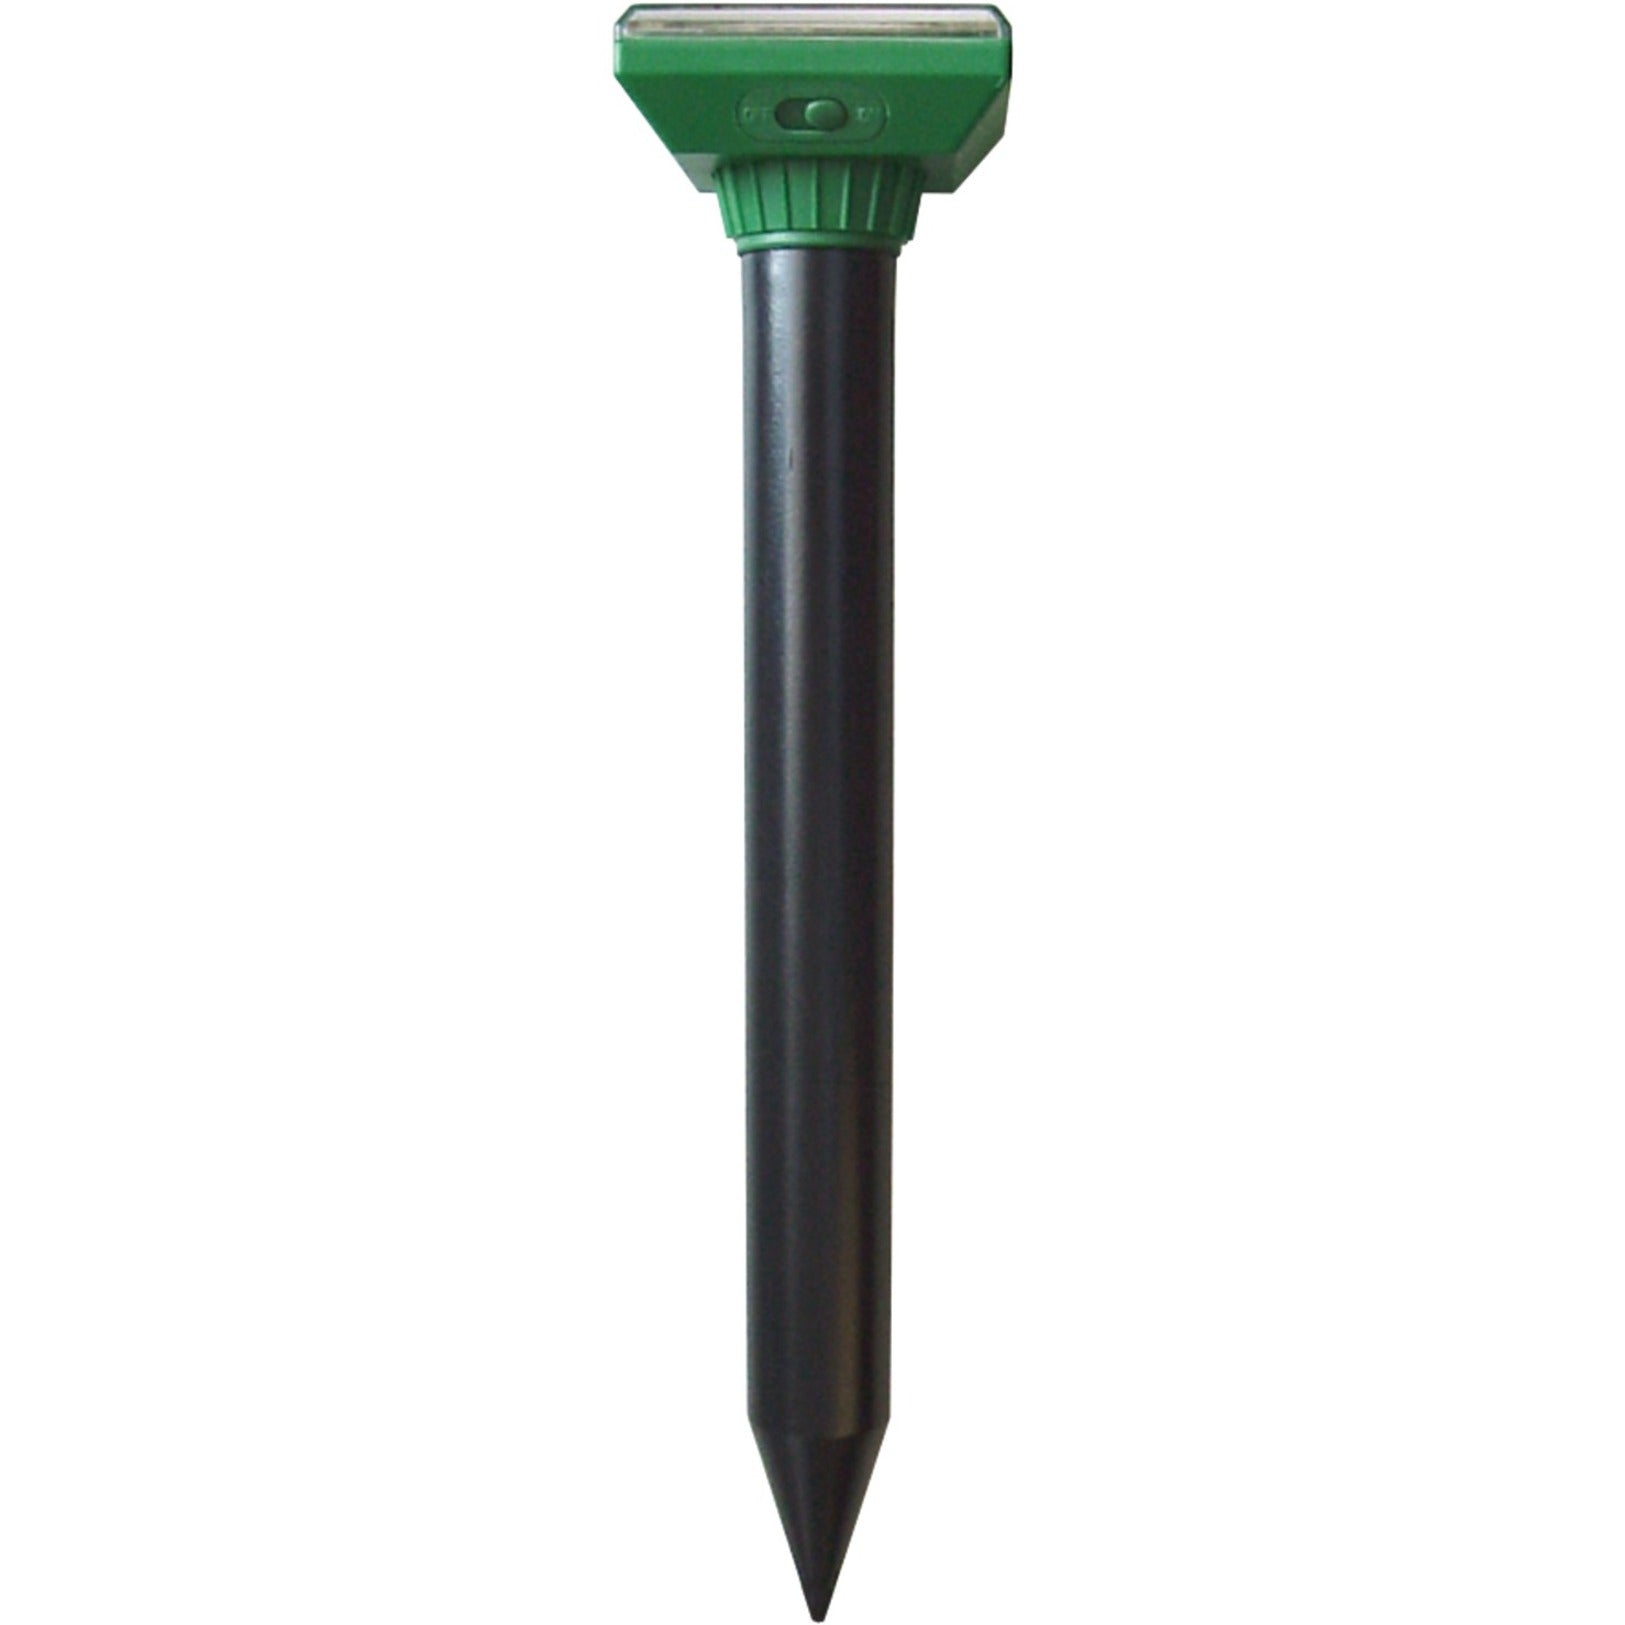 P3 P7911 Sol-Mate Mole & Gopher Chaser, Water Resistant, Covers up to 7500 Sq. Feet